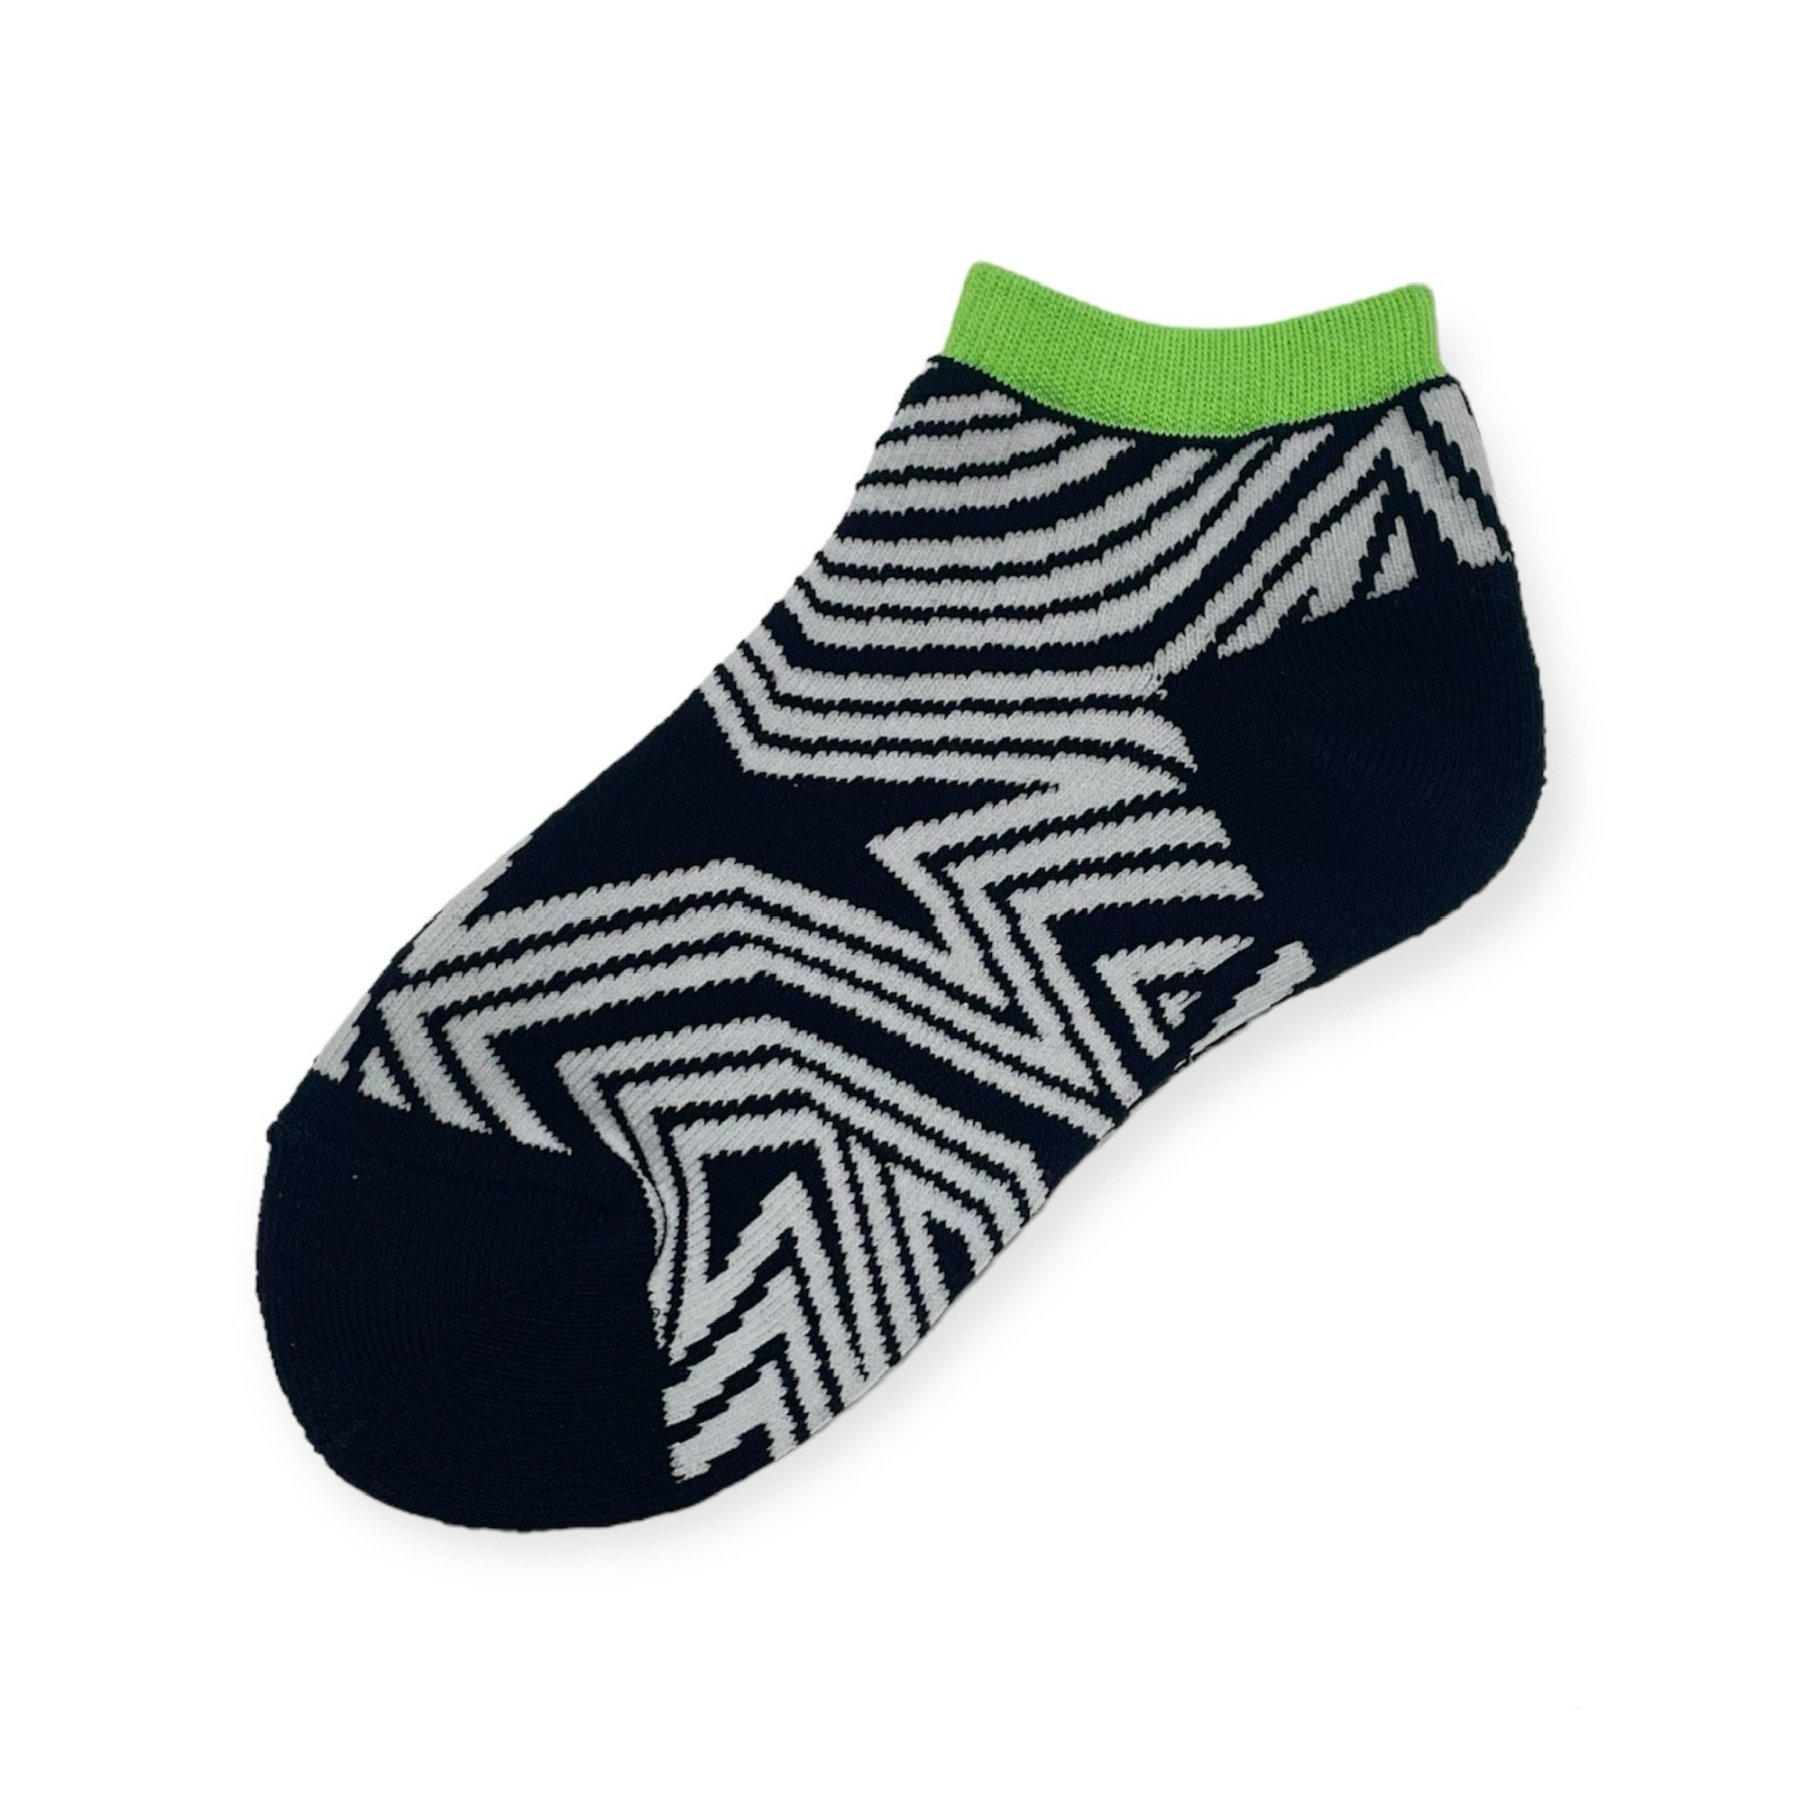 <img class='new_mark_img1' src='https://img.shop-pro.jp/img/new/icons5.gif' style='border:none;display:inline;margin:0px;padding:0px;width:auto;' />Star Tribal ankle socks/WOMEN